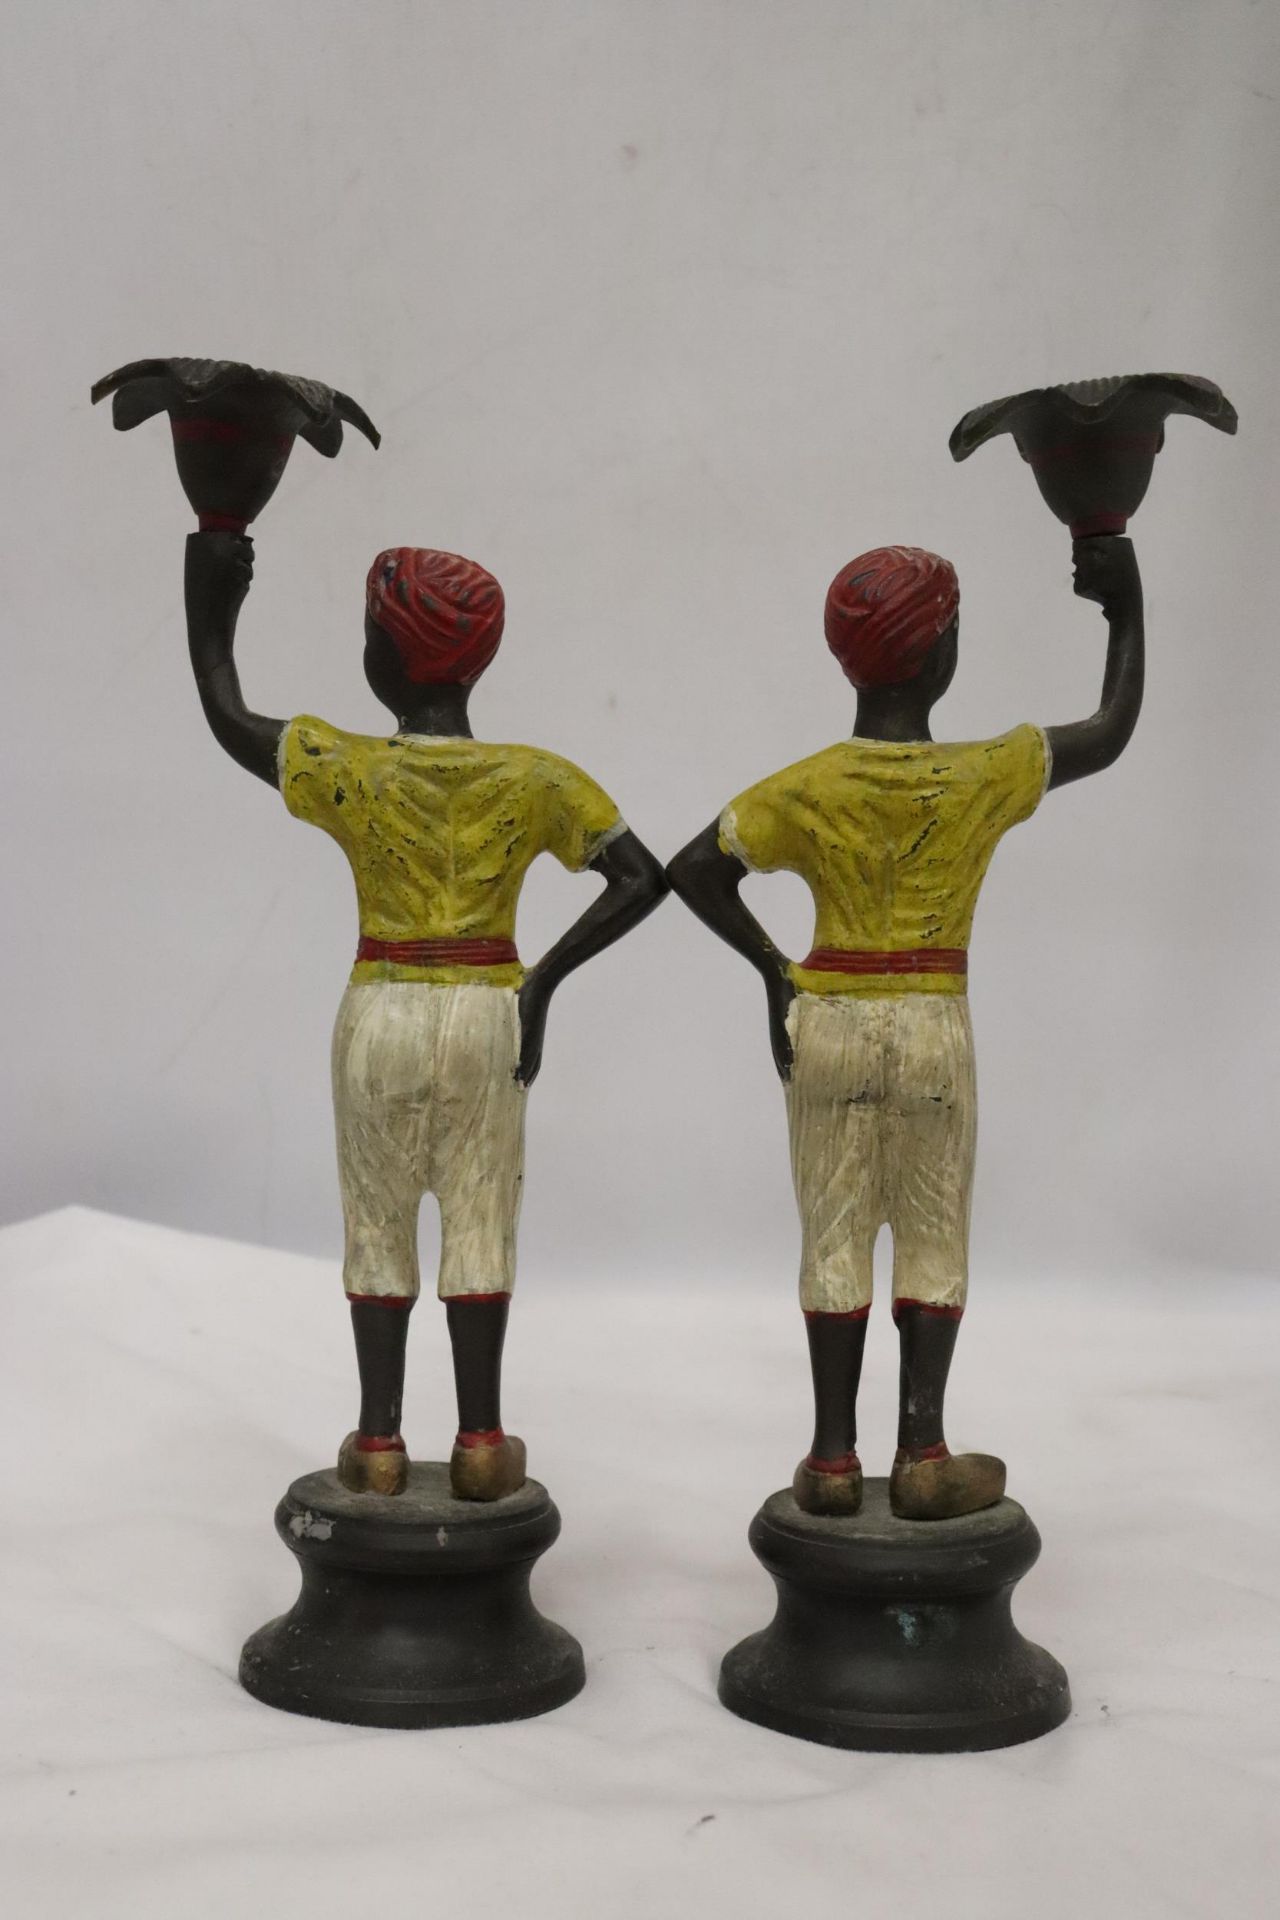 A PAIR OF 19TH CENTURY AUSTRIAN COLD PAINTED BRONZE BLACK A MOOR BOYS CANDLESTICKS - Image 5 of 6